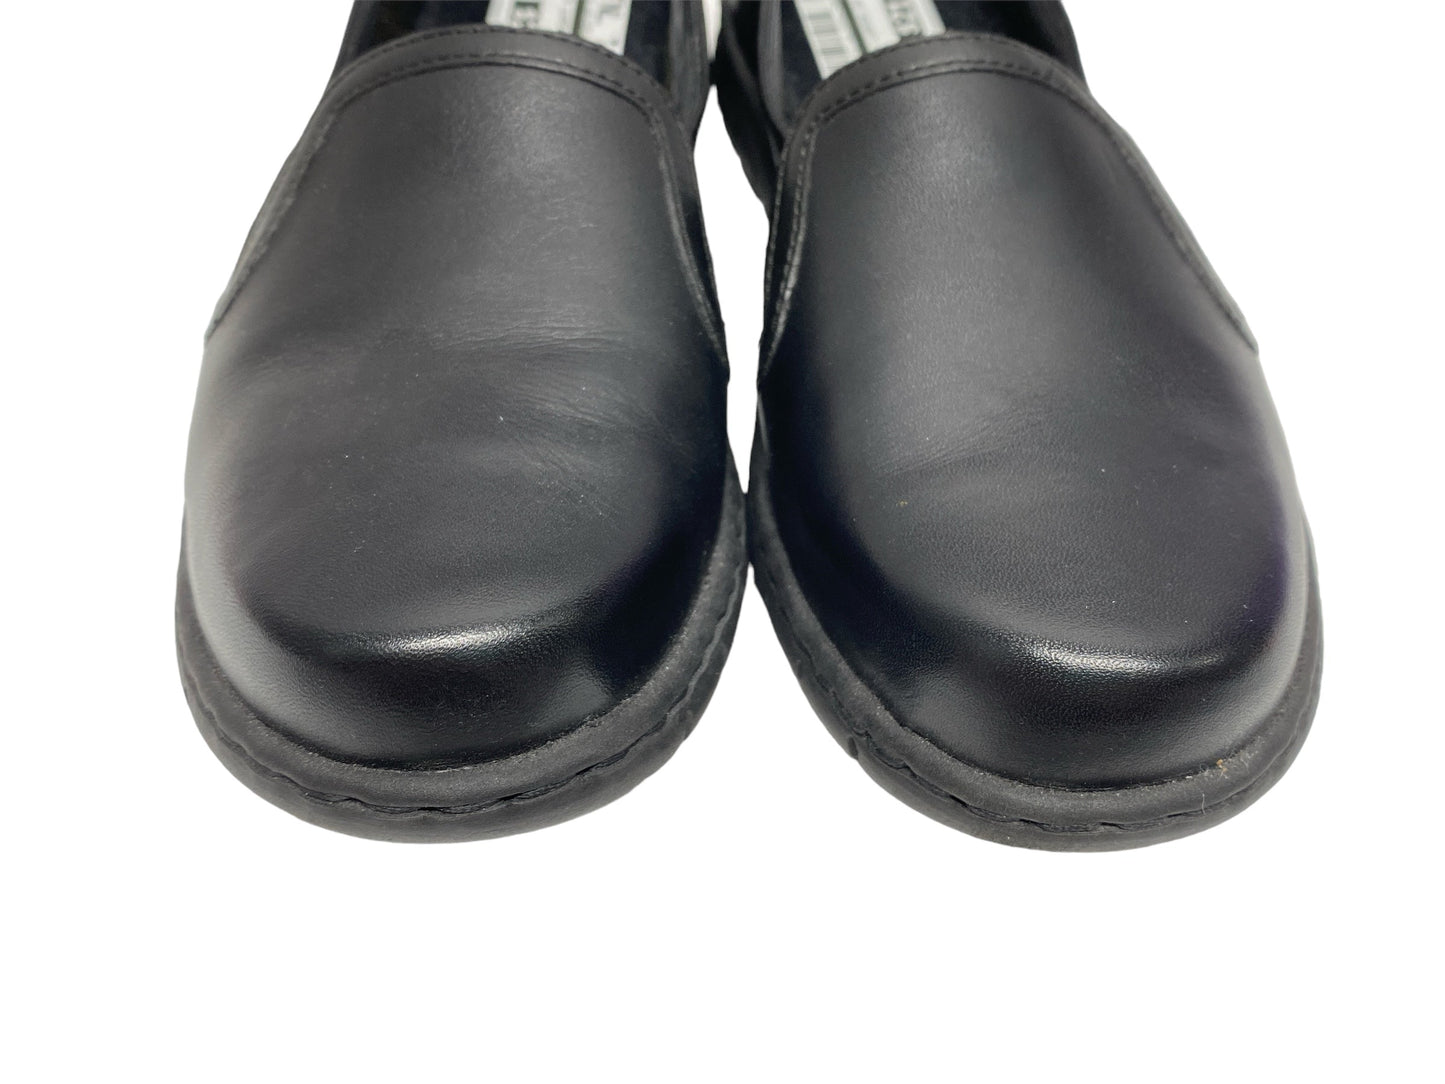 Shoes Flats Loafer Oxford By Born  Size: 10